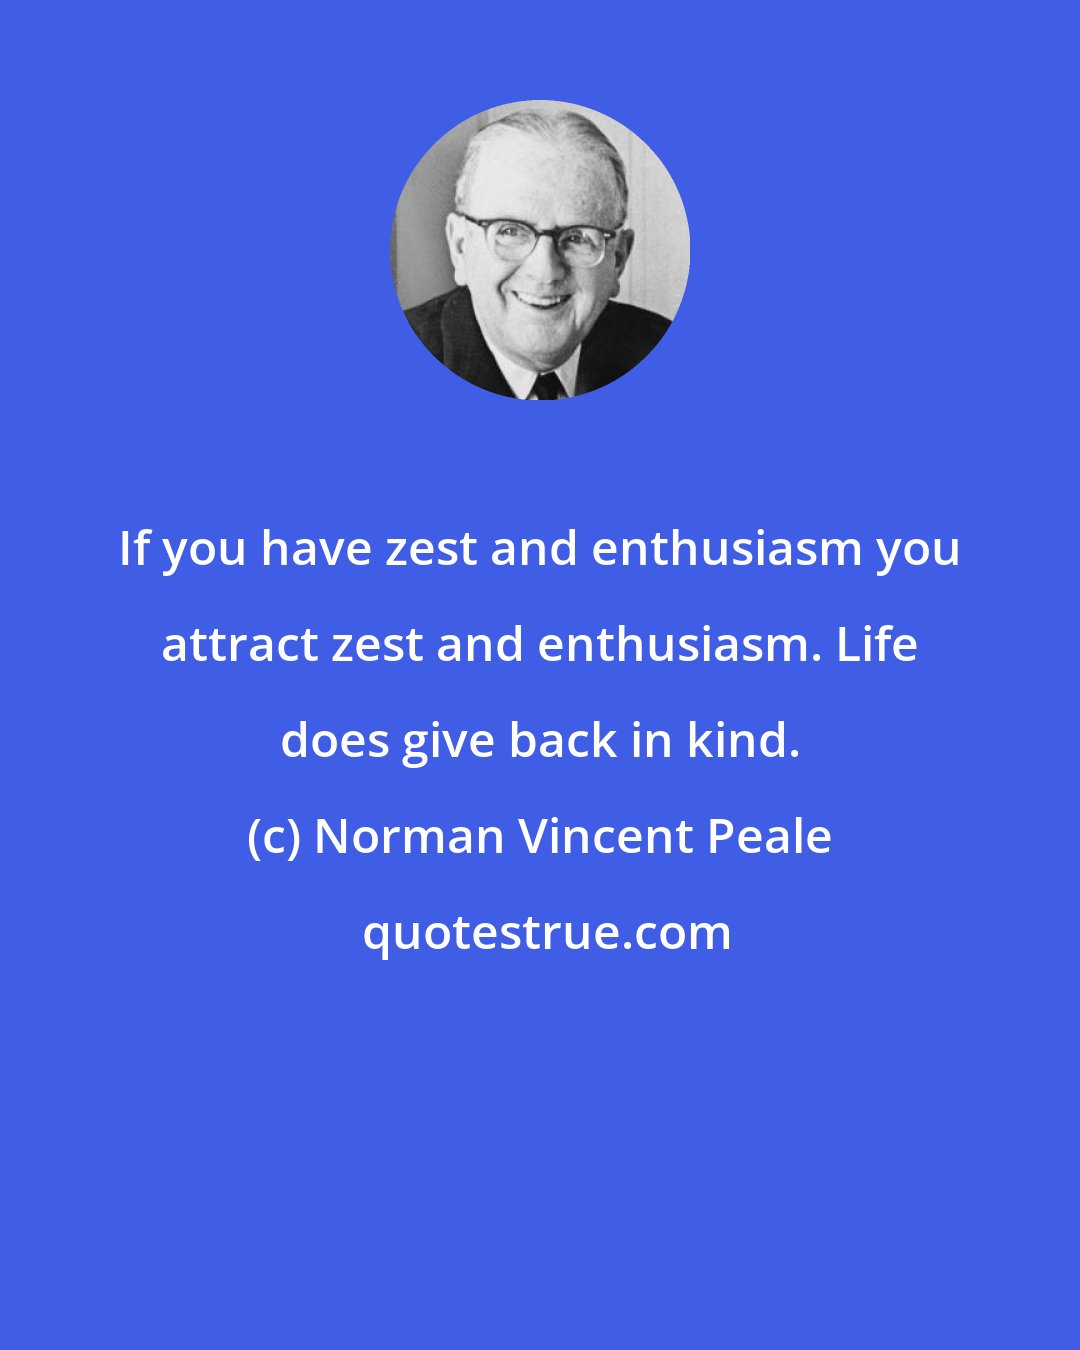 Norman Vincent Peale: If you have zest and enthusiasm you attract zest and enthusiasm. Life does give back in kind.